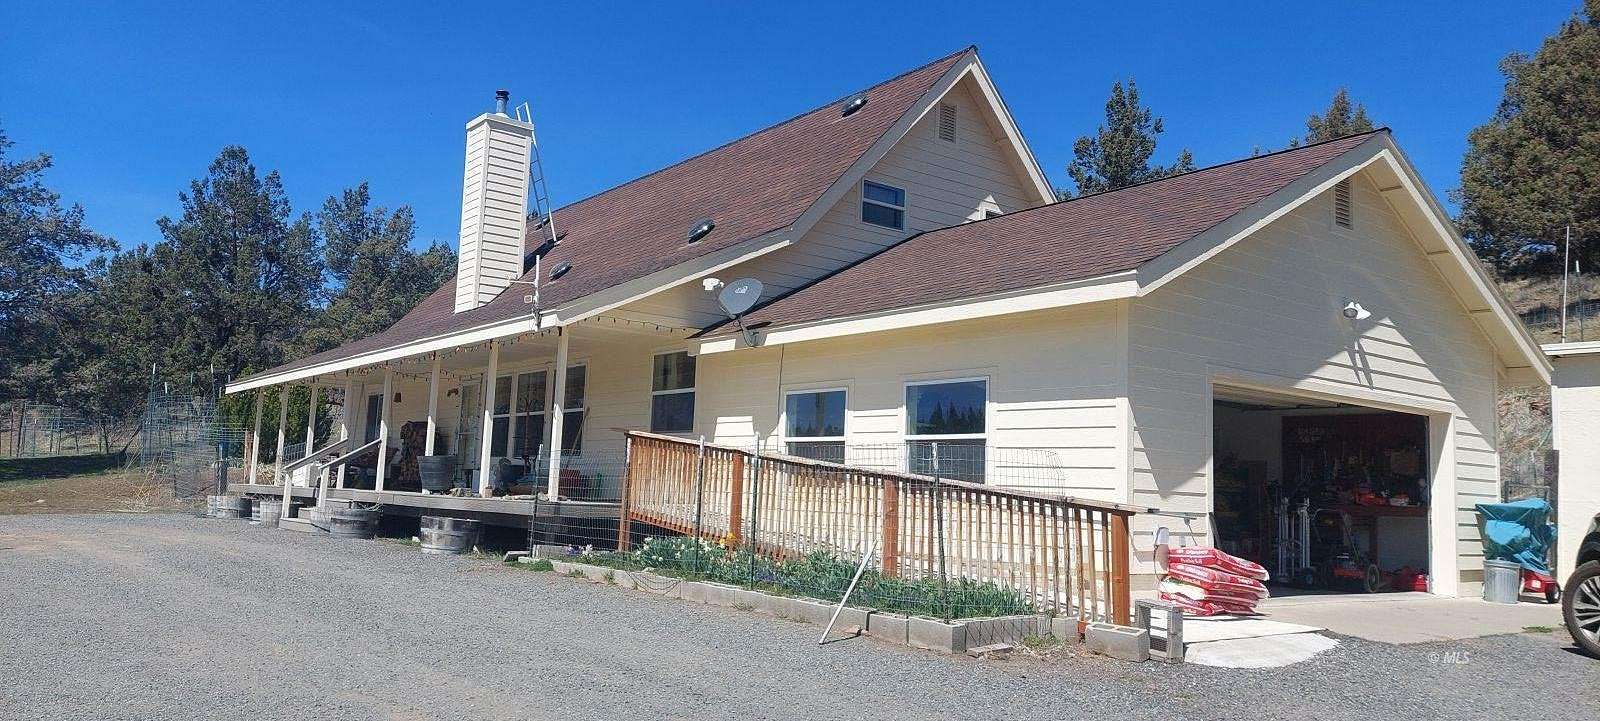 20 Acres of Land with Home for Sale in Alturas, California